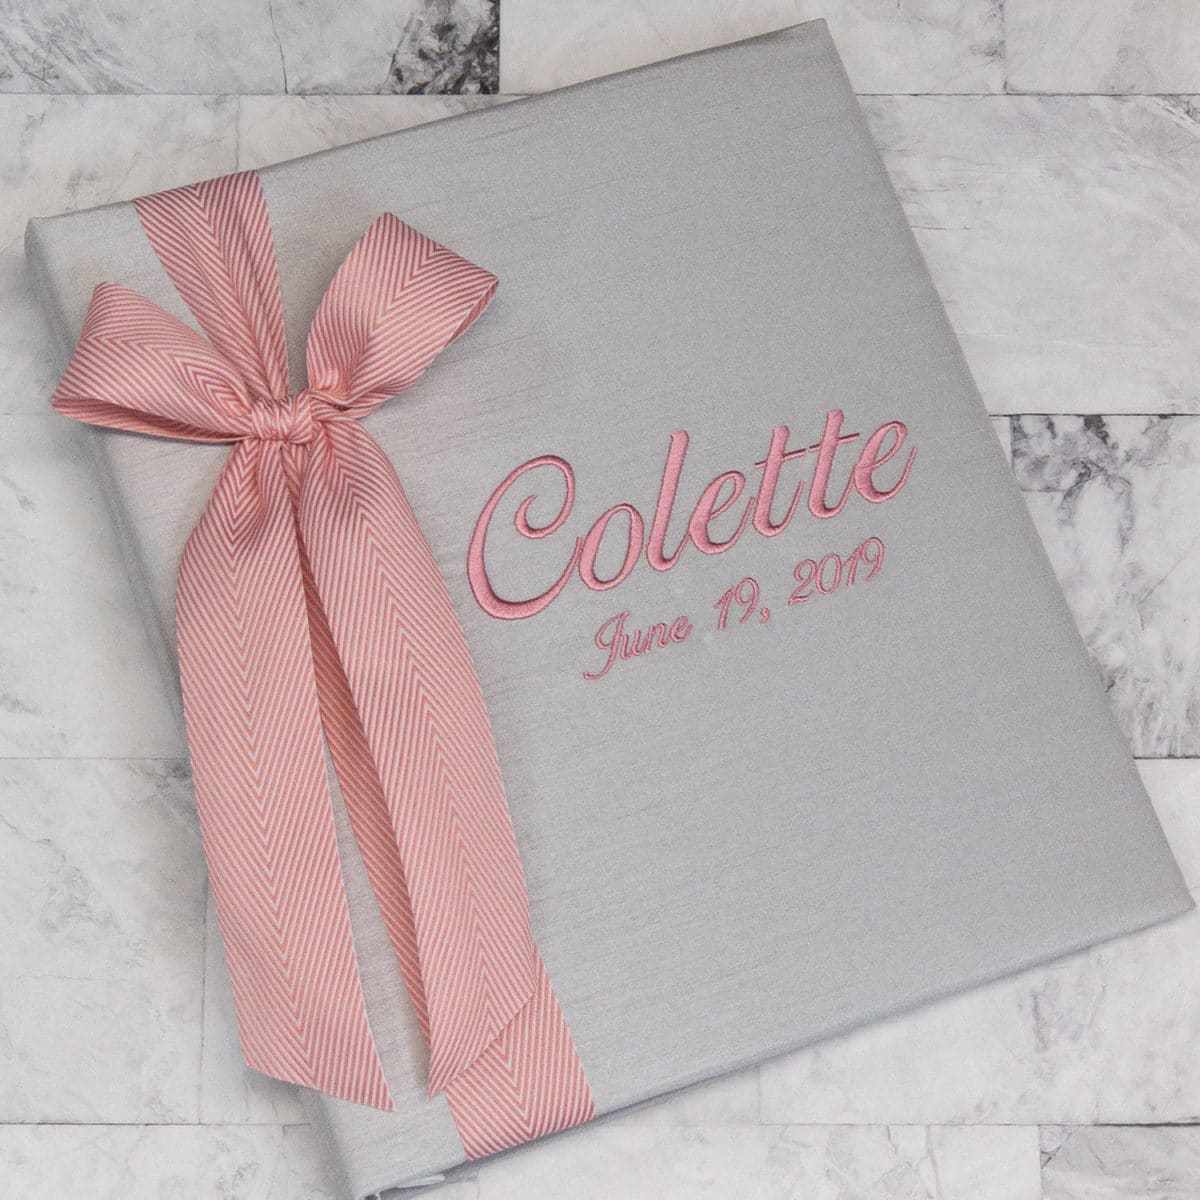 Baby Memory Book in Shantung with Large Striped Bow - Twinkle Twinkle Little One